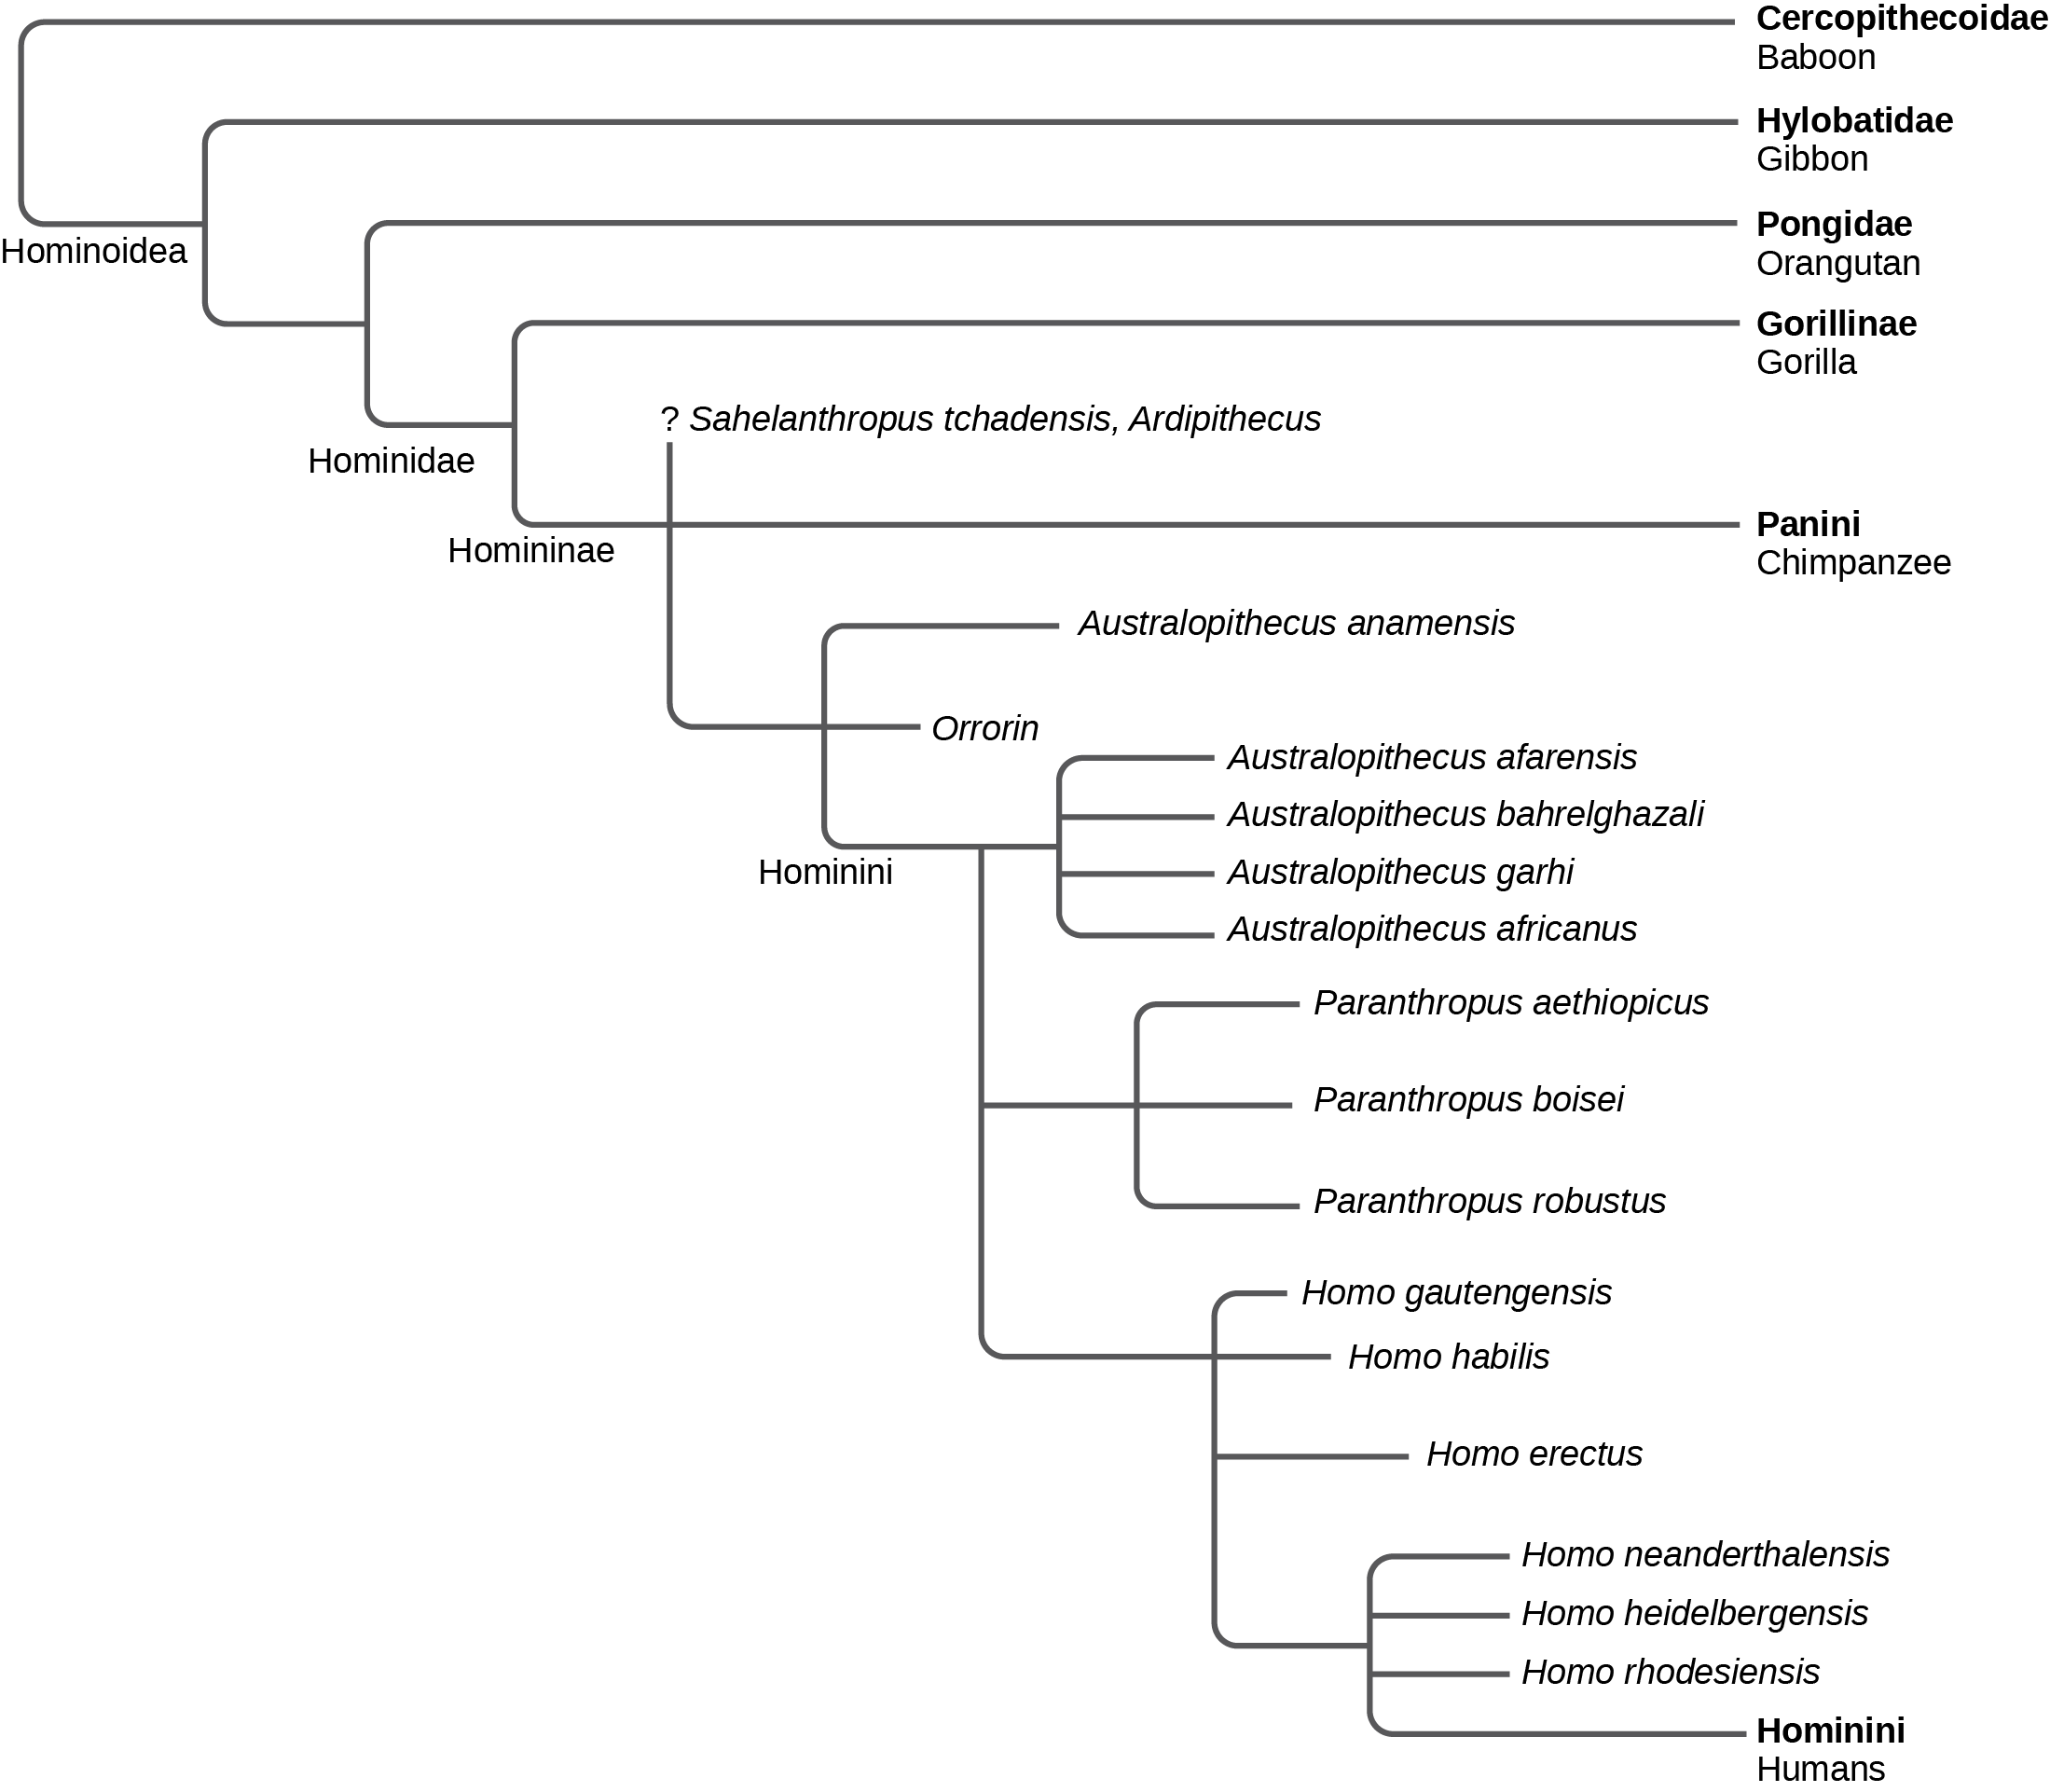 The evolutionary tree shows the relationship between humans and the great apes. All great apes, including baboons, gibbons, orangutans, gorillas, chimpanzees, humans, and human ancestors, belong in the superfamily Hominoidea. Of these great apes, all but baboons and gibbons belong in the family Hominidae. Gorillas, chimpanzees, humans, and human ancestors belong in the subfamily Homininae. Humans and their direct ancestors belong in the tribe Hominini.